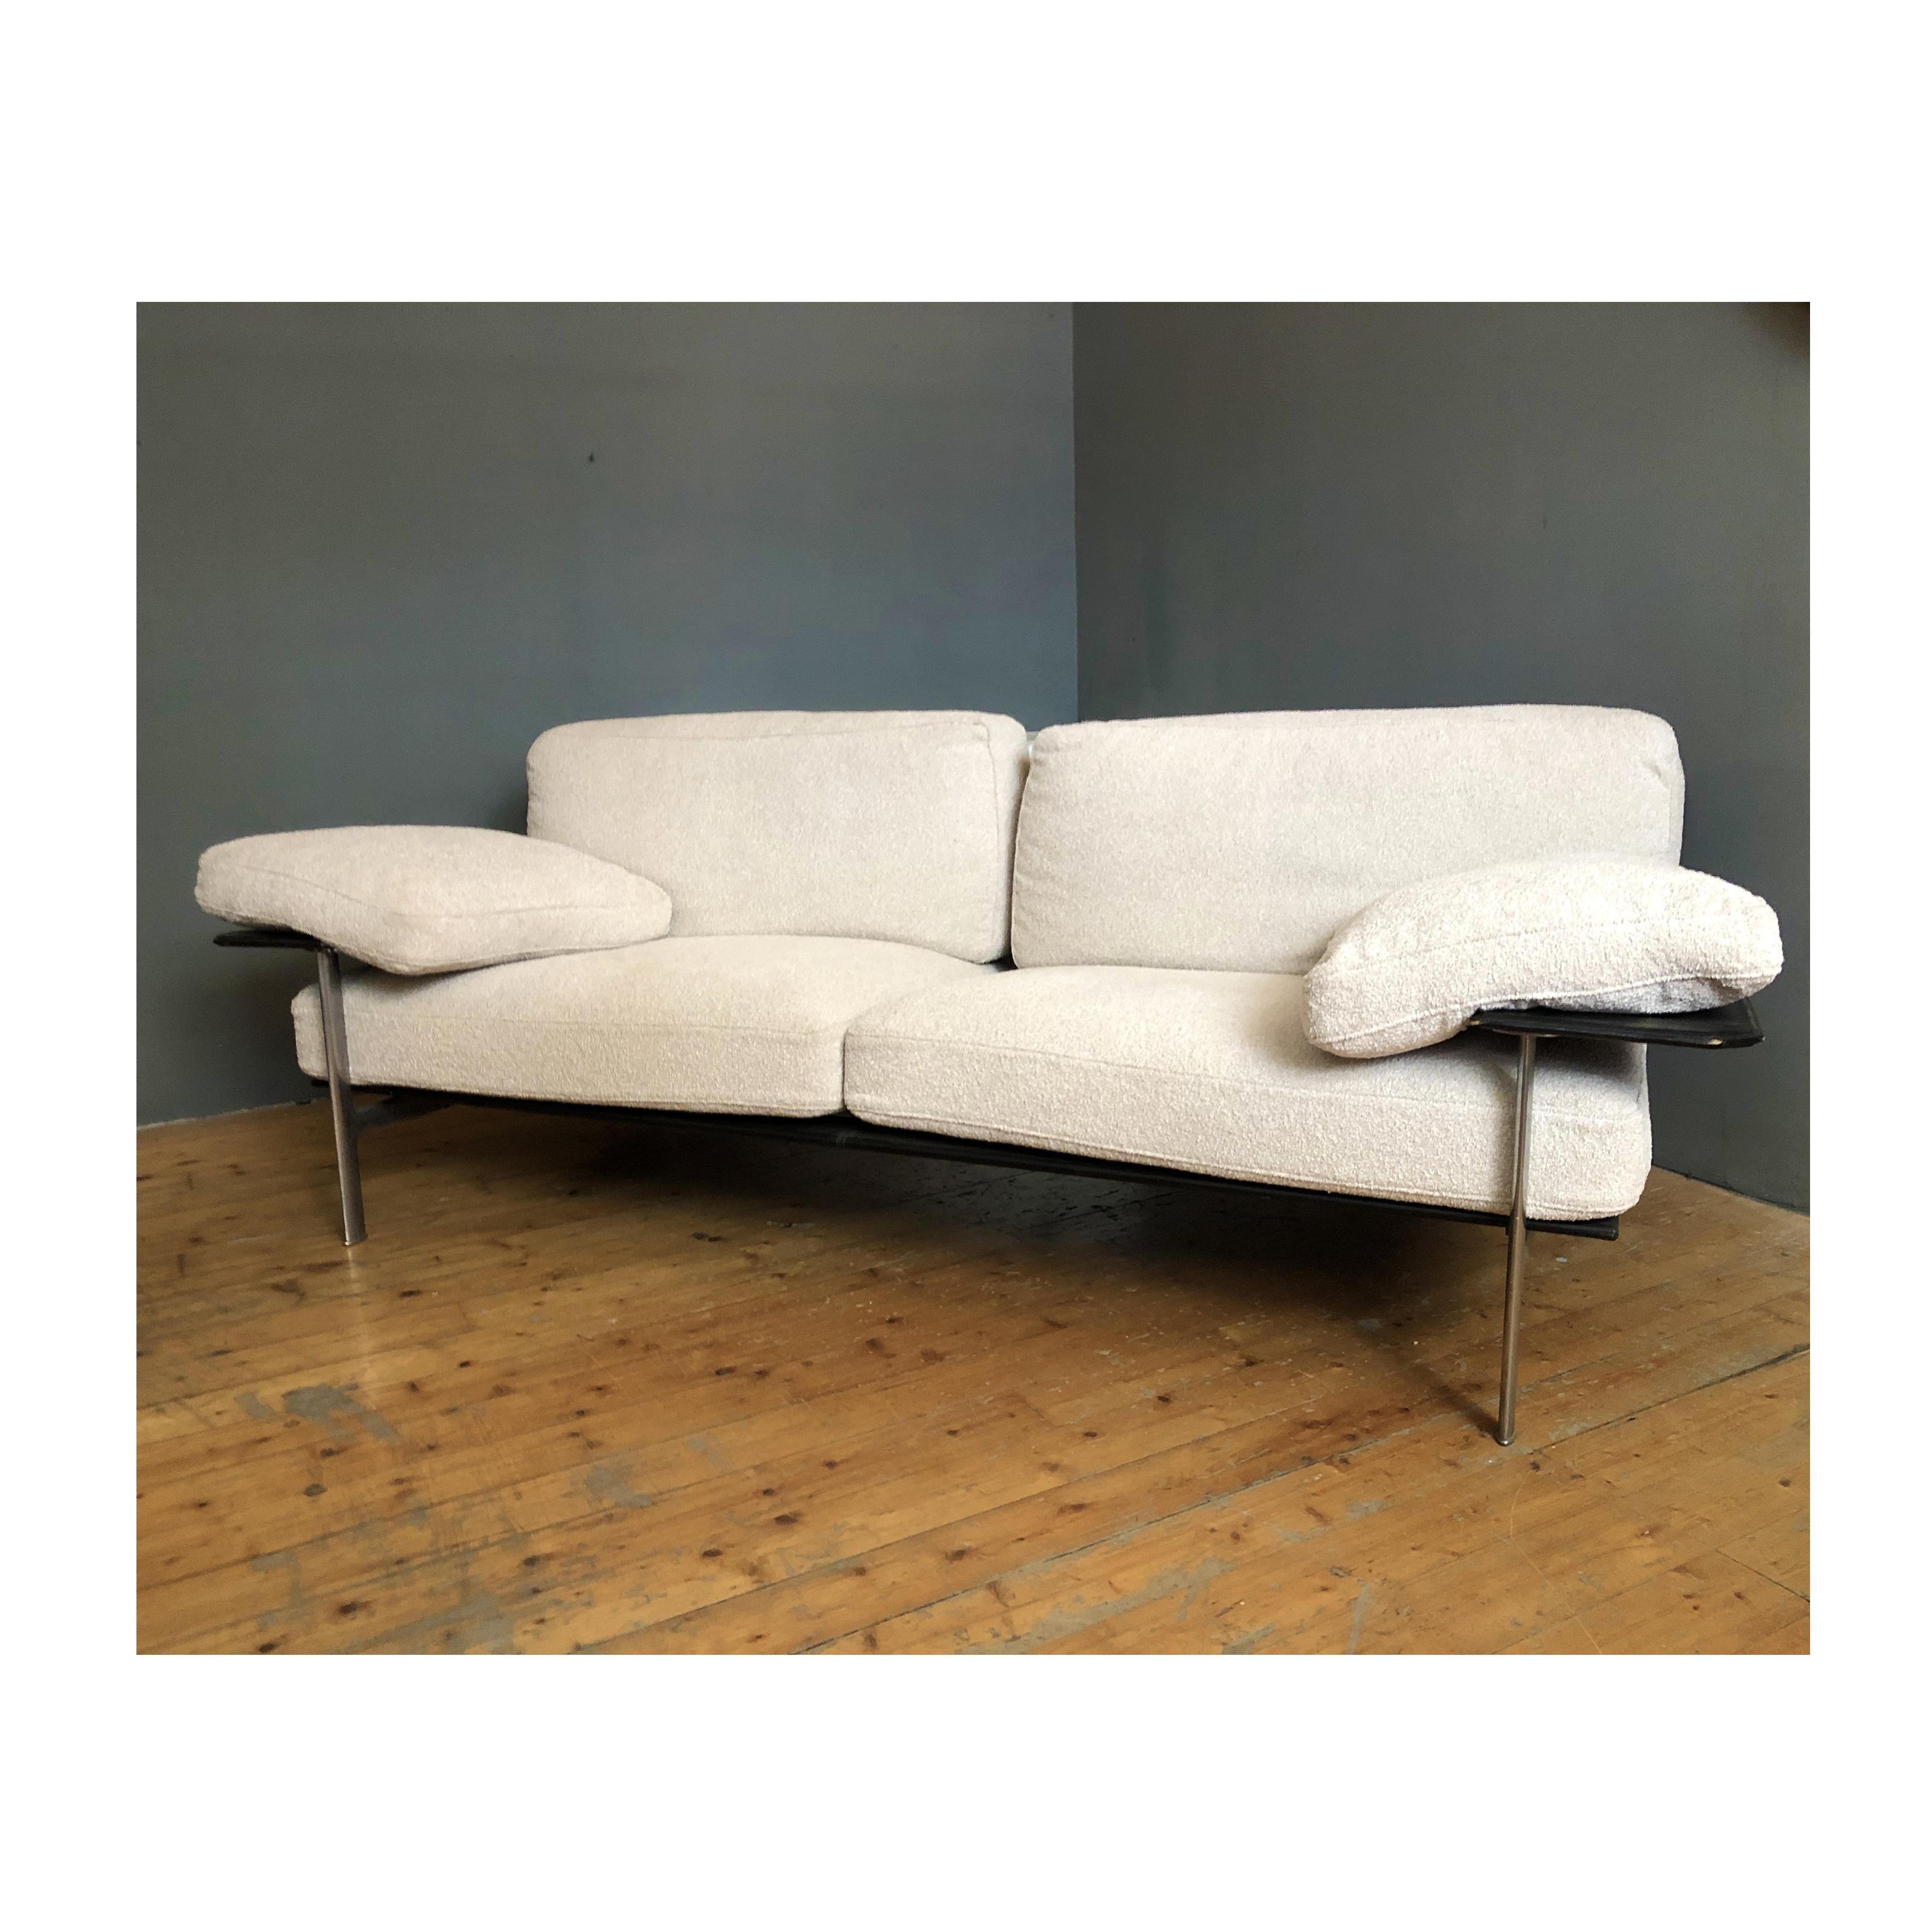 Diesis sofa by Antonio Citterio for B&B Italia two-seater in white bouclè fabric

Diesis sofa, by B&B Italia.
The two-seater sofa is a product of B&B Italia from the 1970s
The structure in black leather and steel, steel foot.
Upholstery in new white